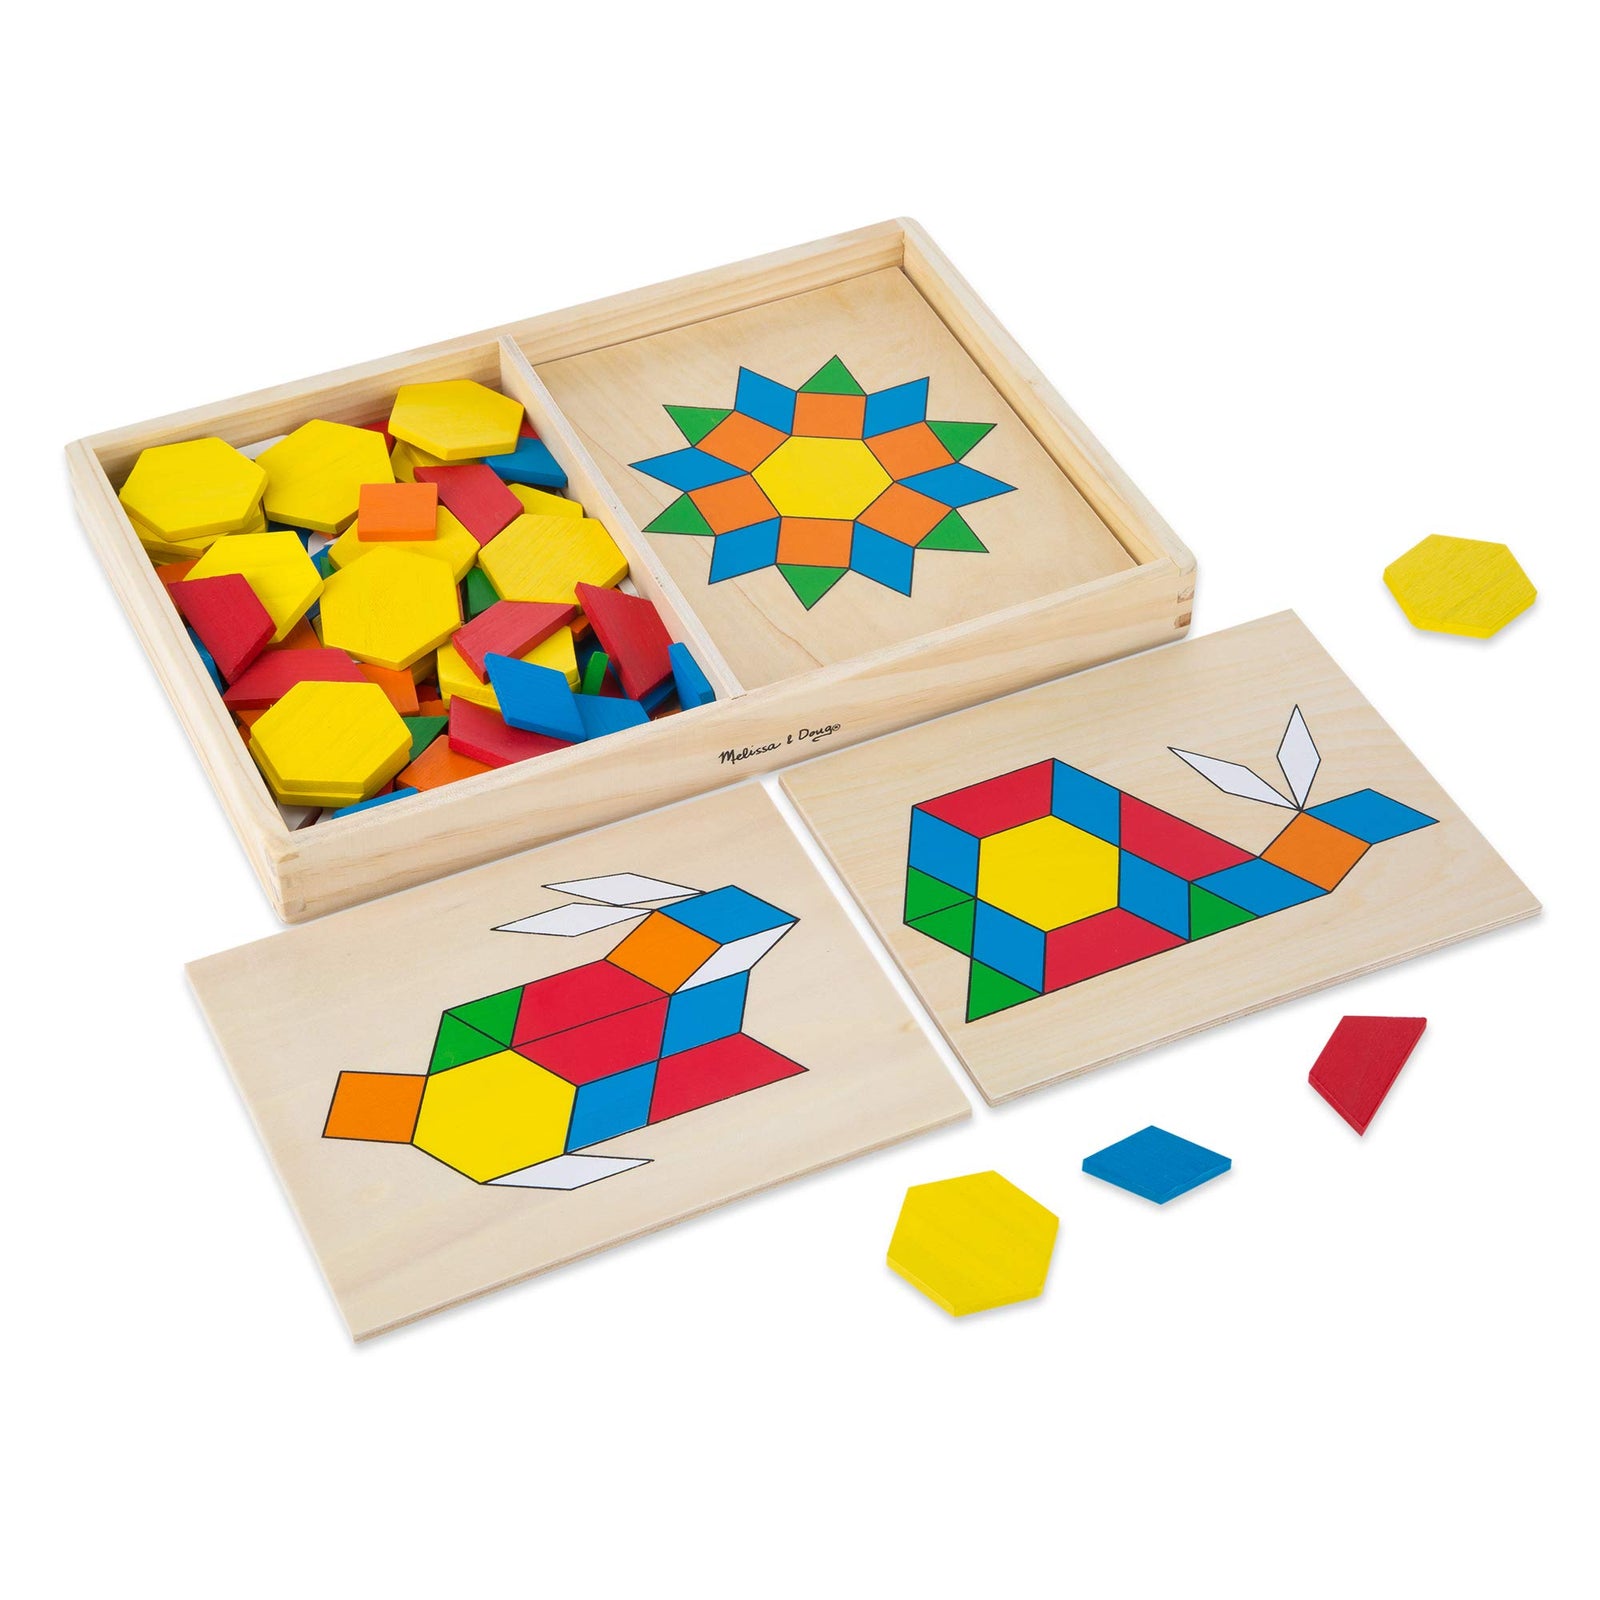 Melissa & Doug Pattern Blocks and Boards - Classic Toy With 120 Solid Wood Shapes and 5 Double-Sided Panels